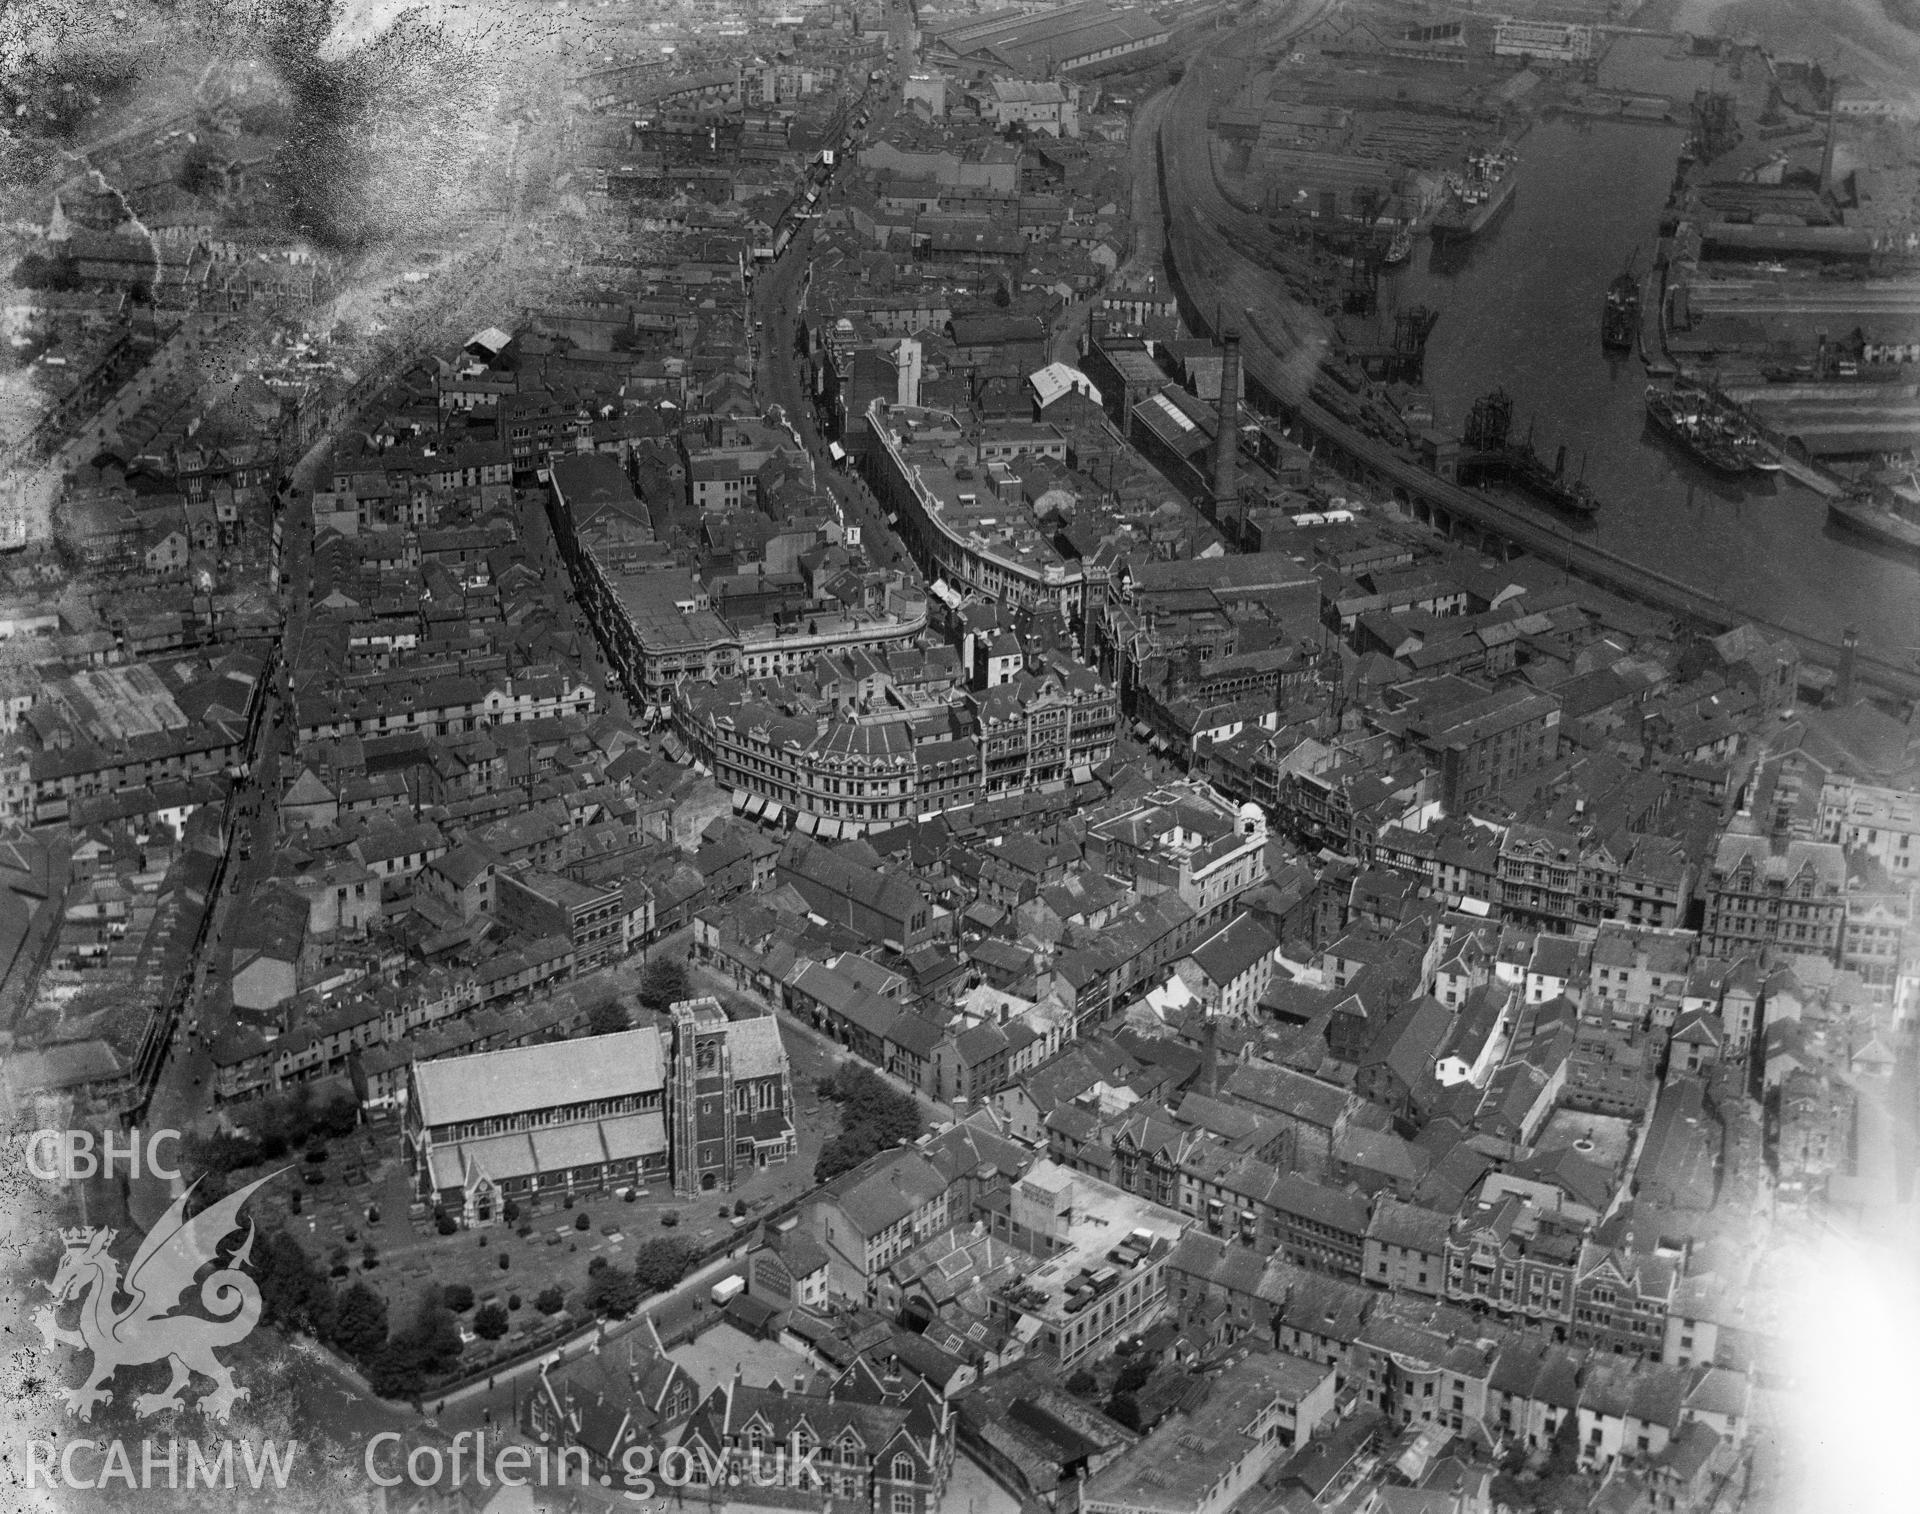 Black and white oblique aerial photograph showing Swansea City, from Aerofilms album Swansea (Box W30), taken by Aerofilms Ltd and dated 1923.